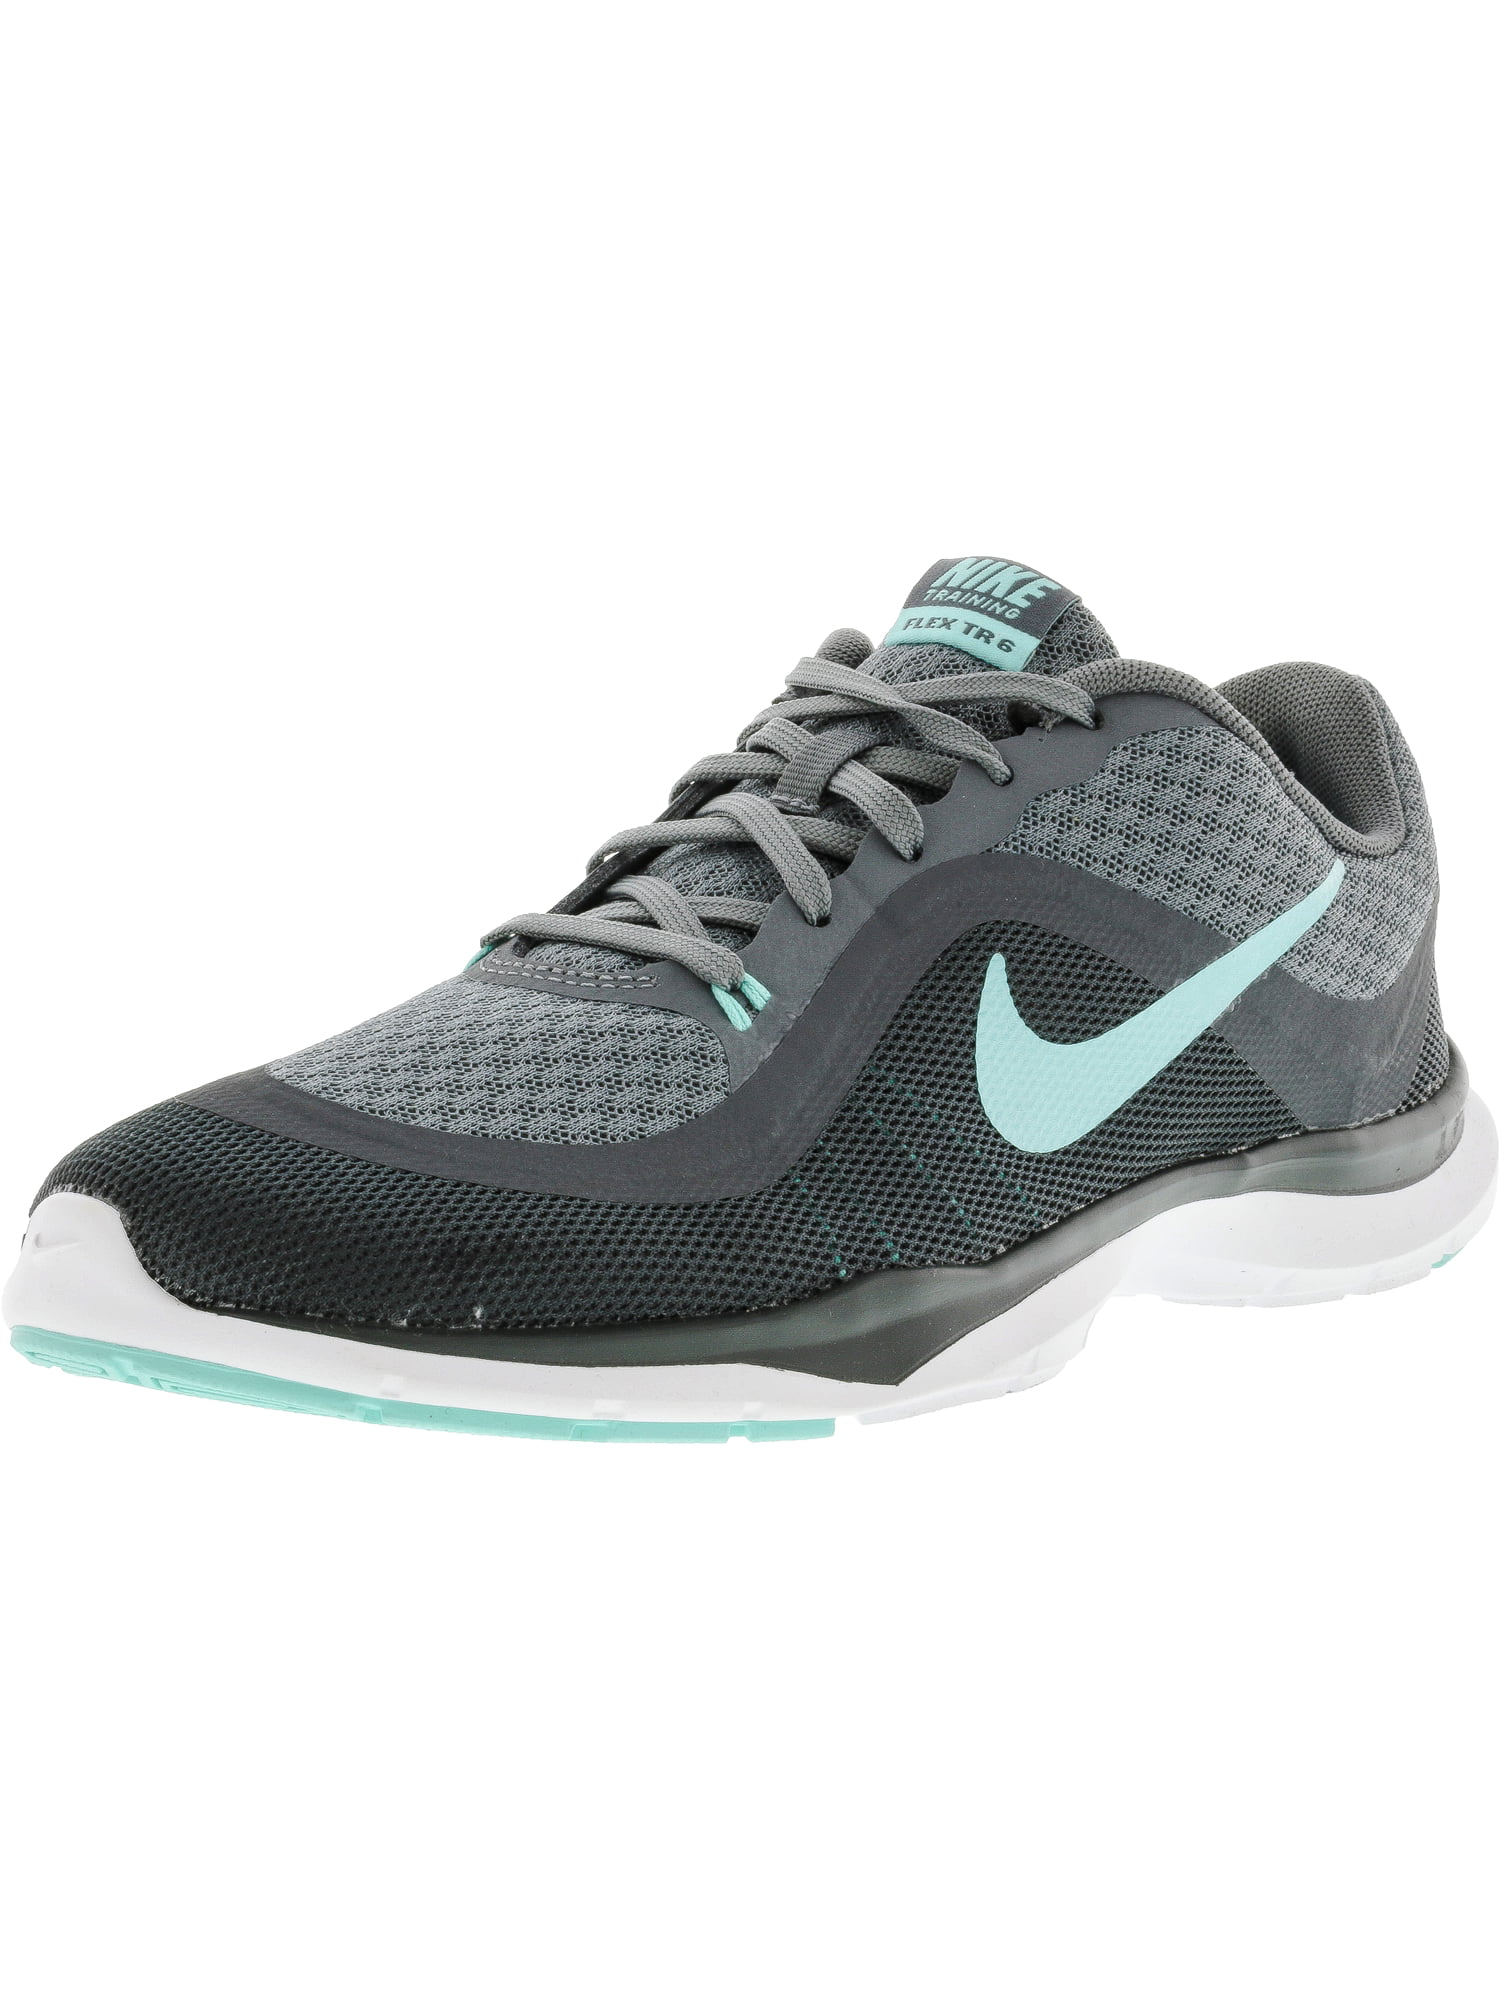 nike grey and turquoise shoes